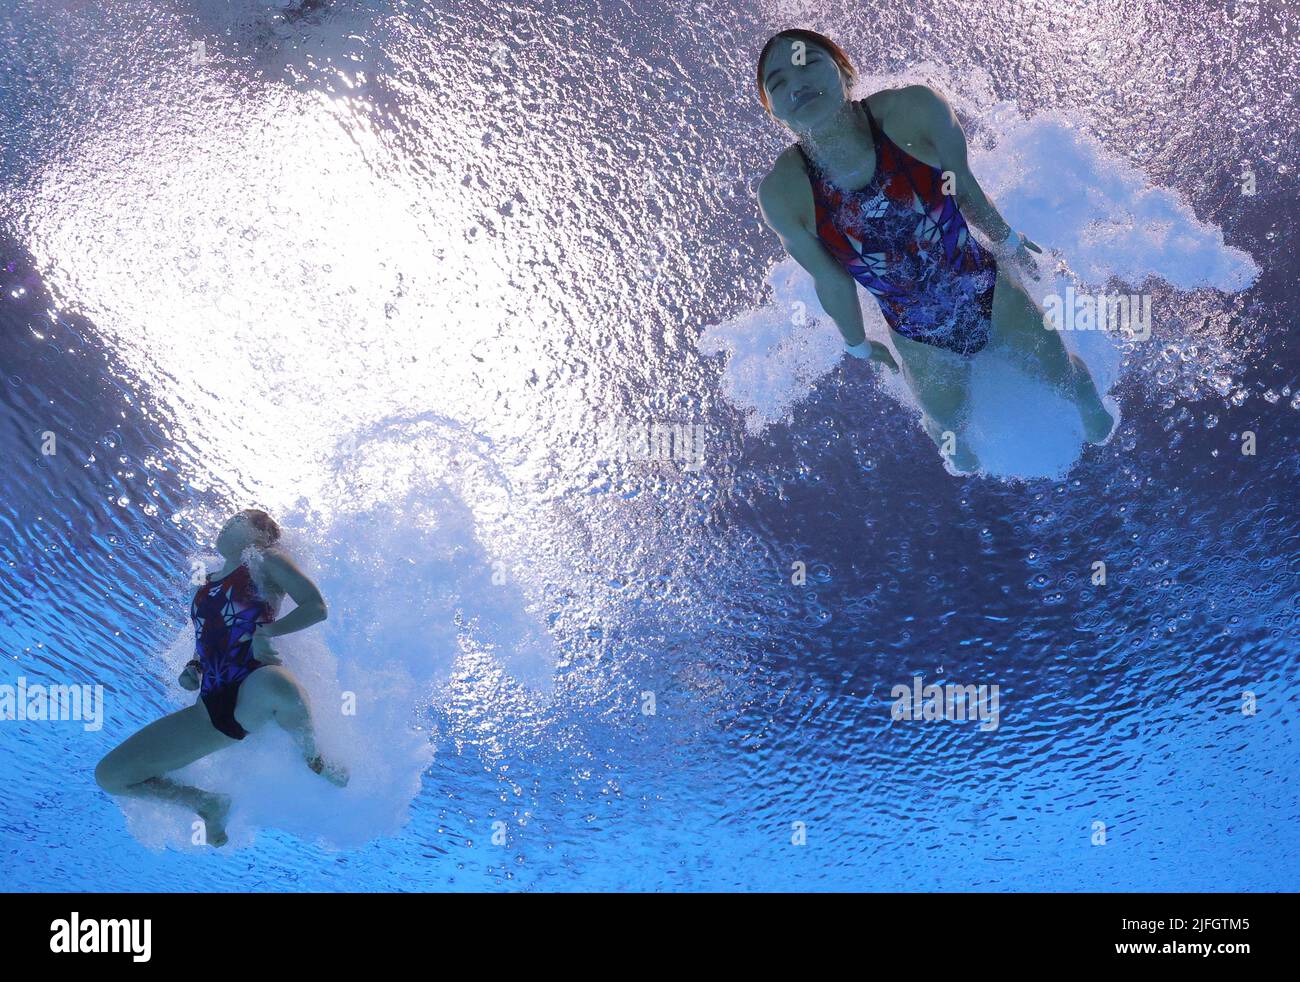 Diving - FINA World Championships - Duna Arena, Budapest, Hungary - July 3, 2022 Malaysia's Yan Yee Ng and Nur Dhabitah Sabri in action during the women's 3m synchronised final REUTERS/Antonio Bronic Stock Photo